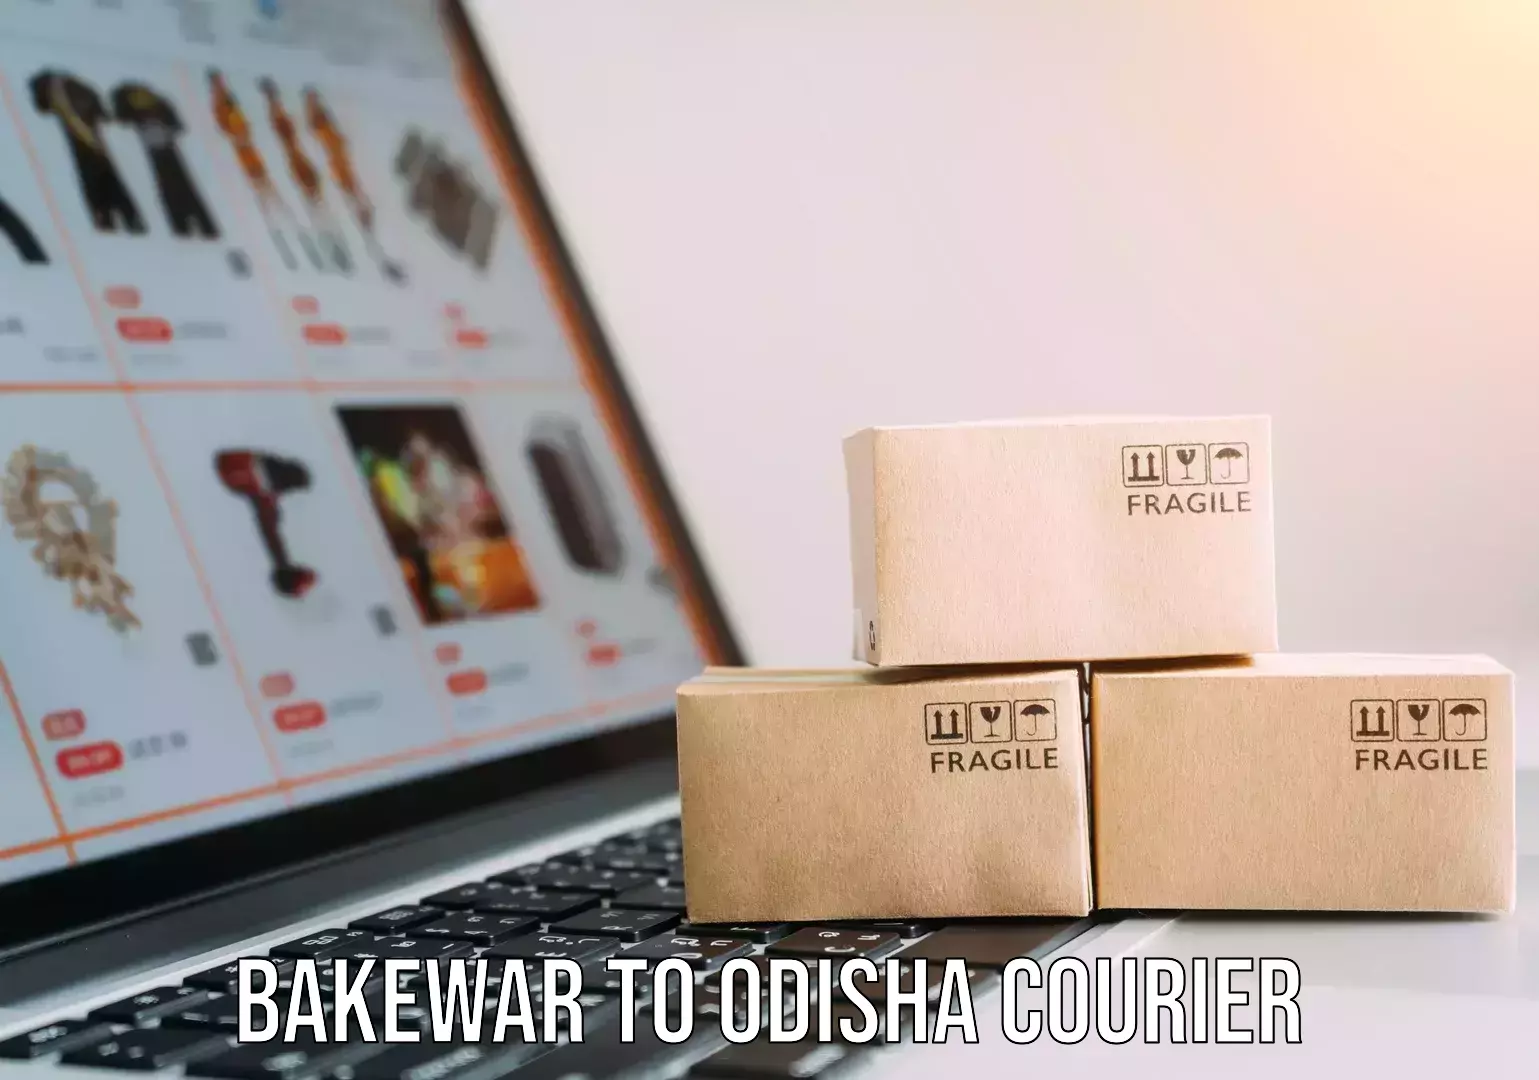 Next-day delivery options Bakewar to Odisha